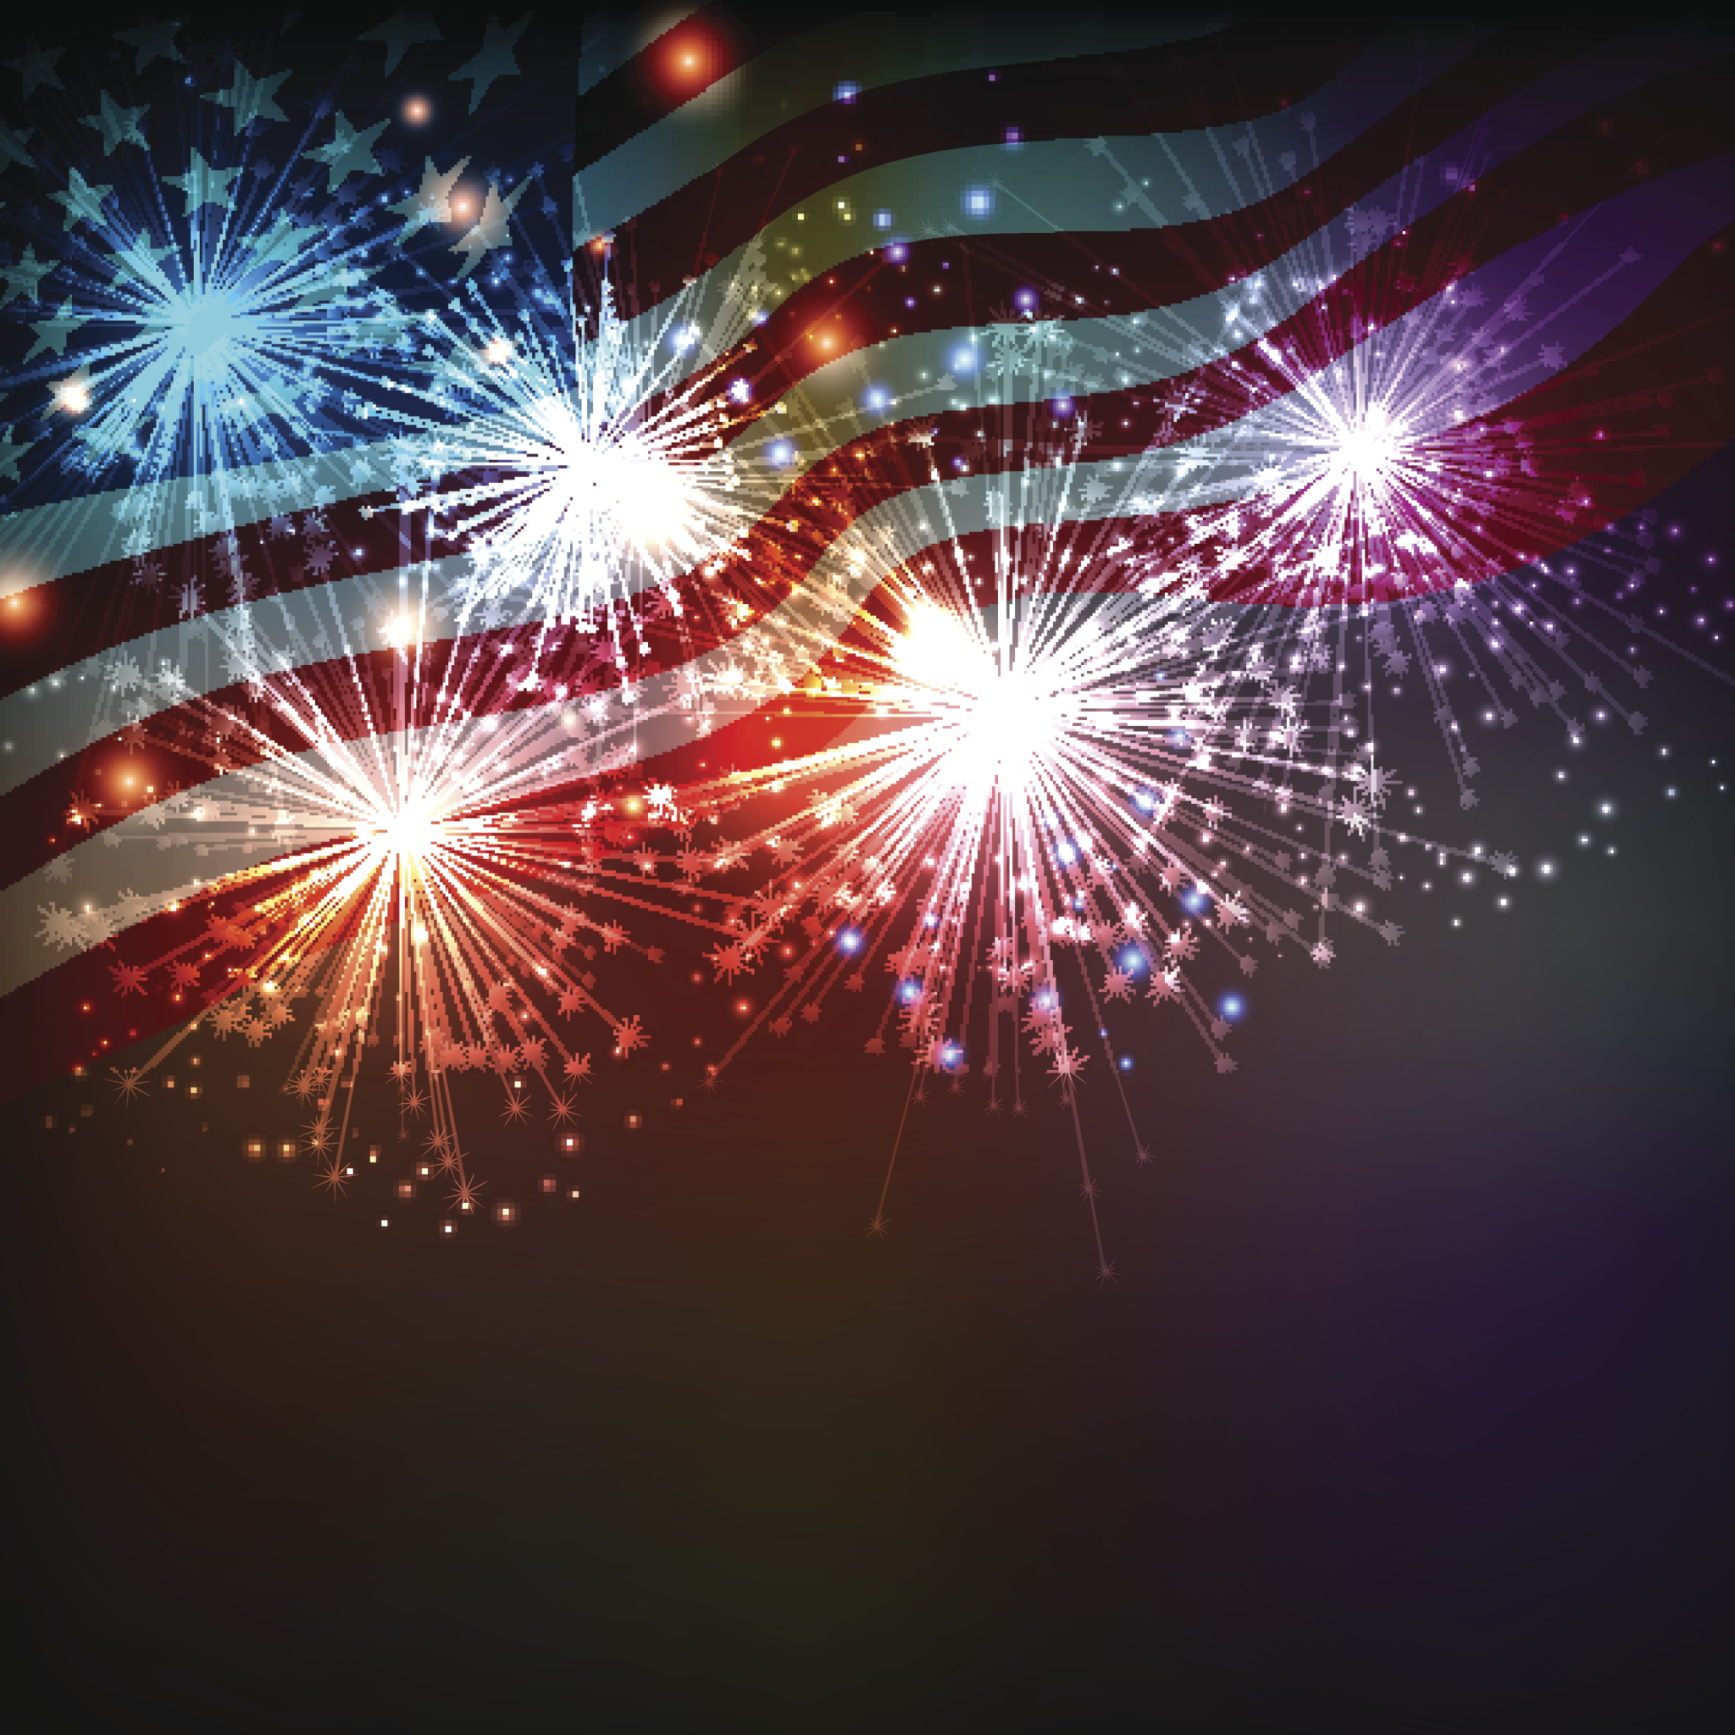 <h1 class="tribe-events-single-event-title">Princeton Independence Day Celebration</h1>